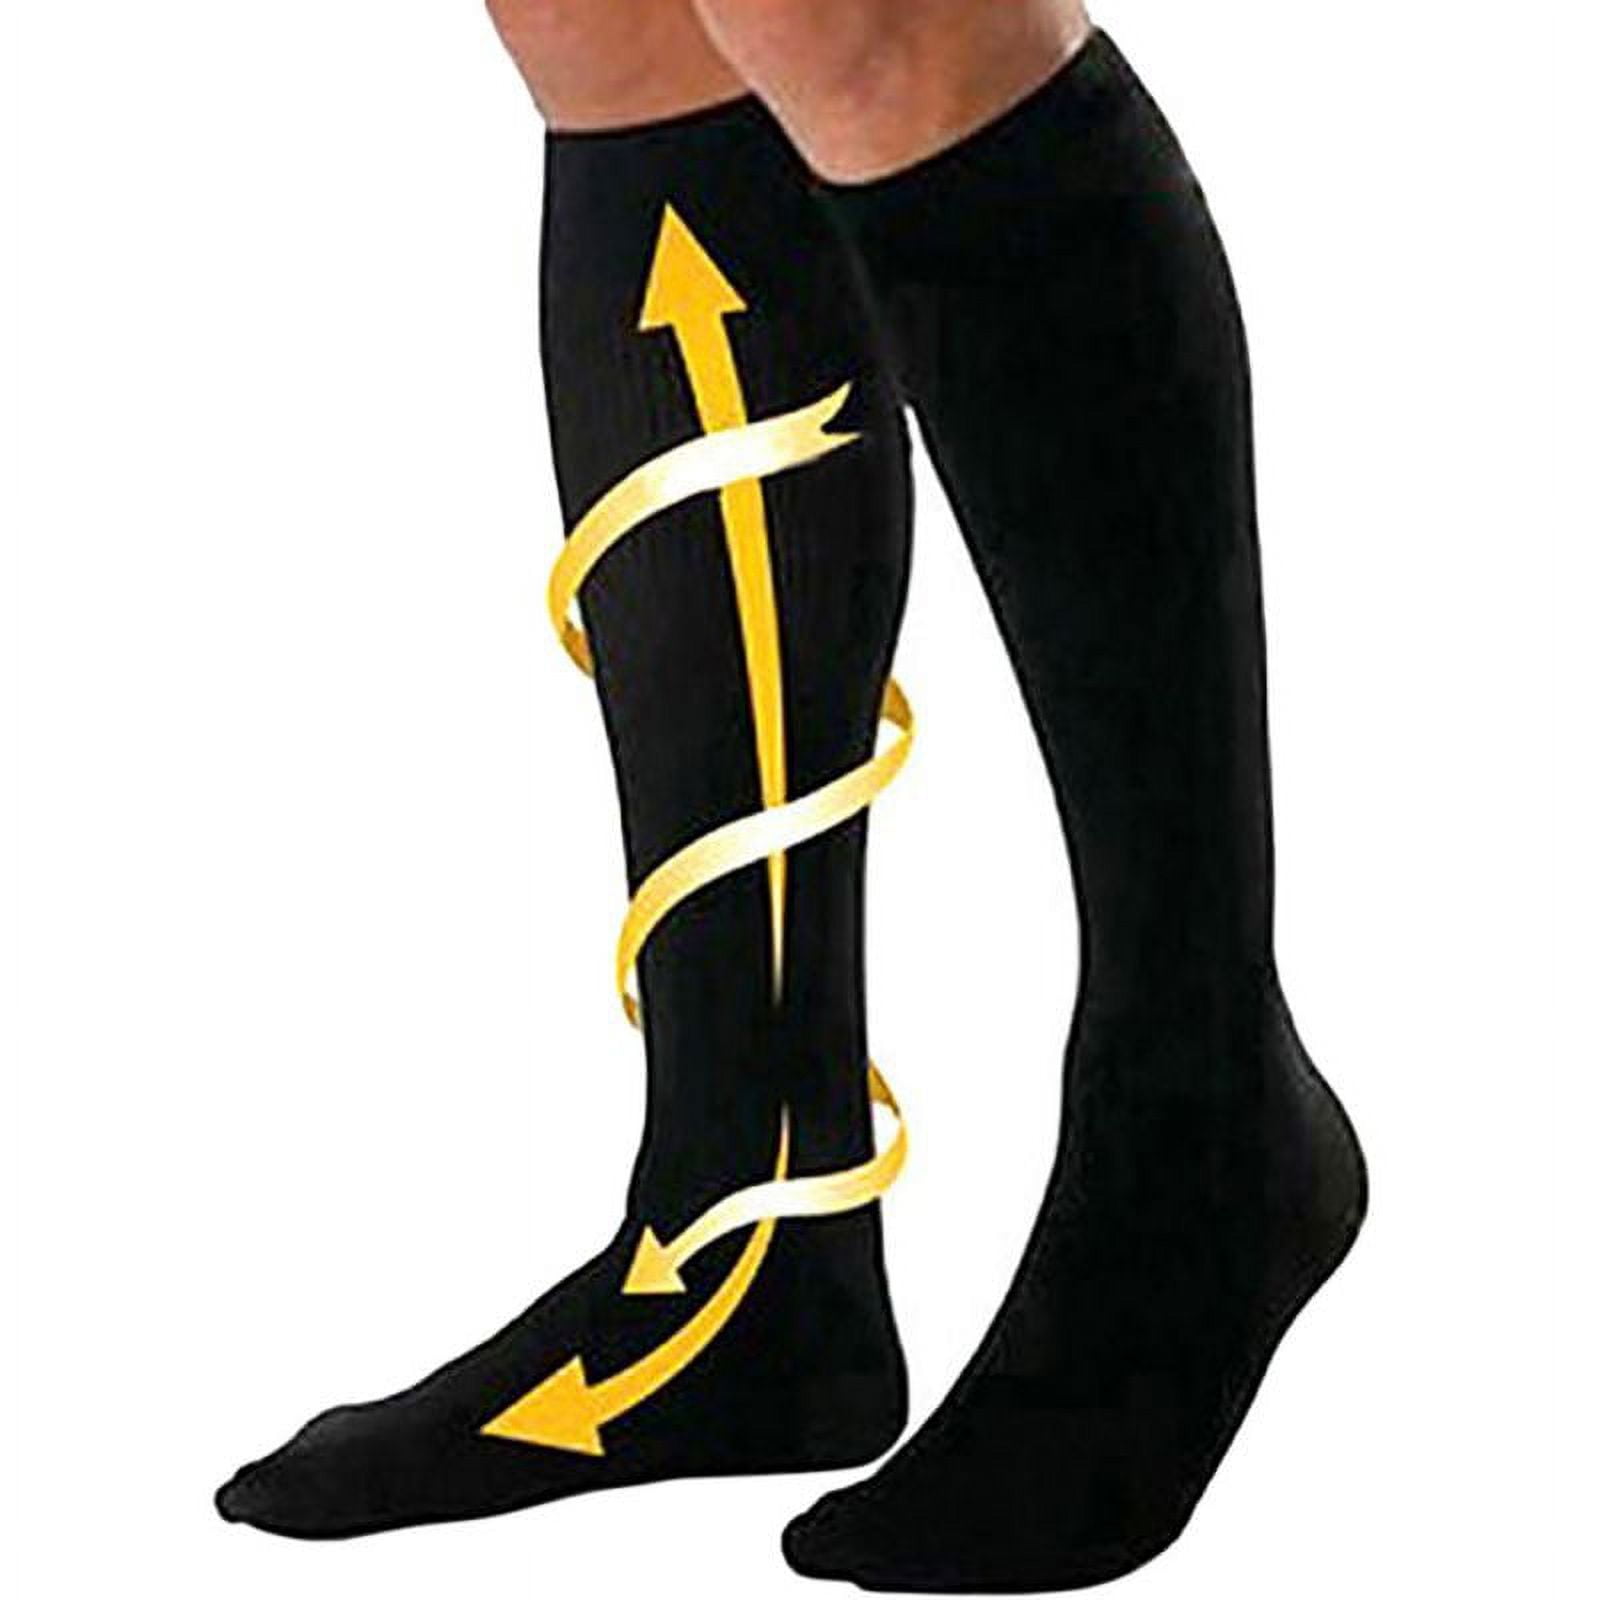 Compression Stockings Strength20-30mmhg Compression Thigh High Stockings  For Women - Varicose Vein Support